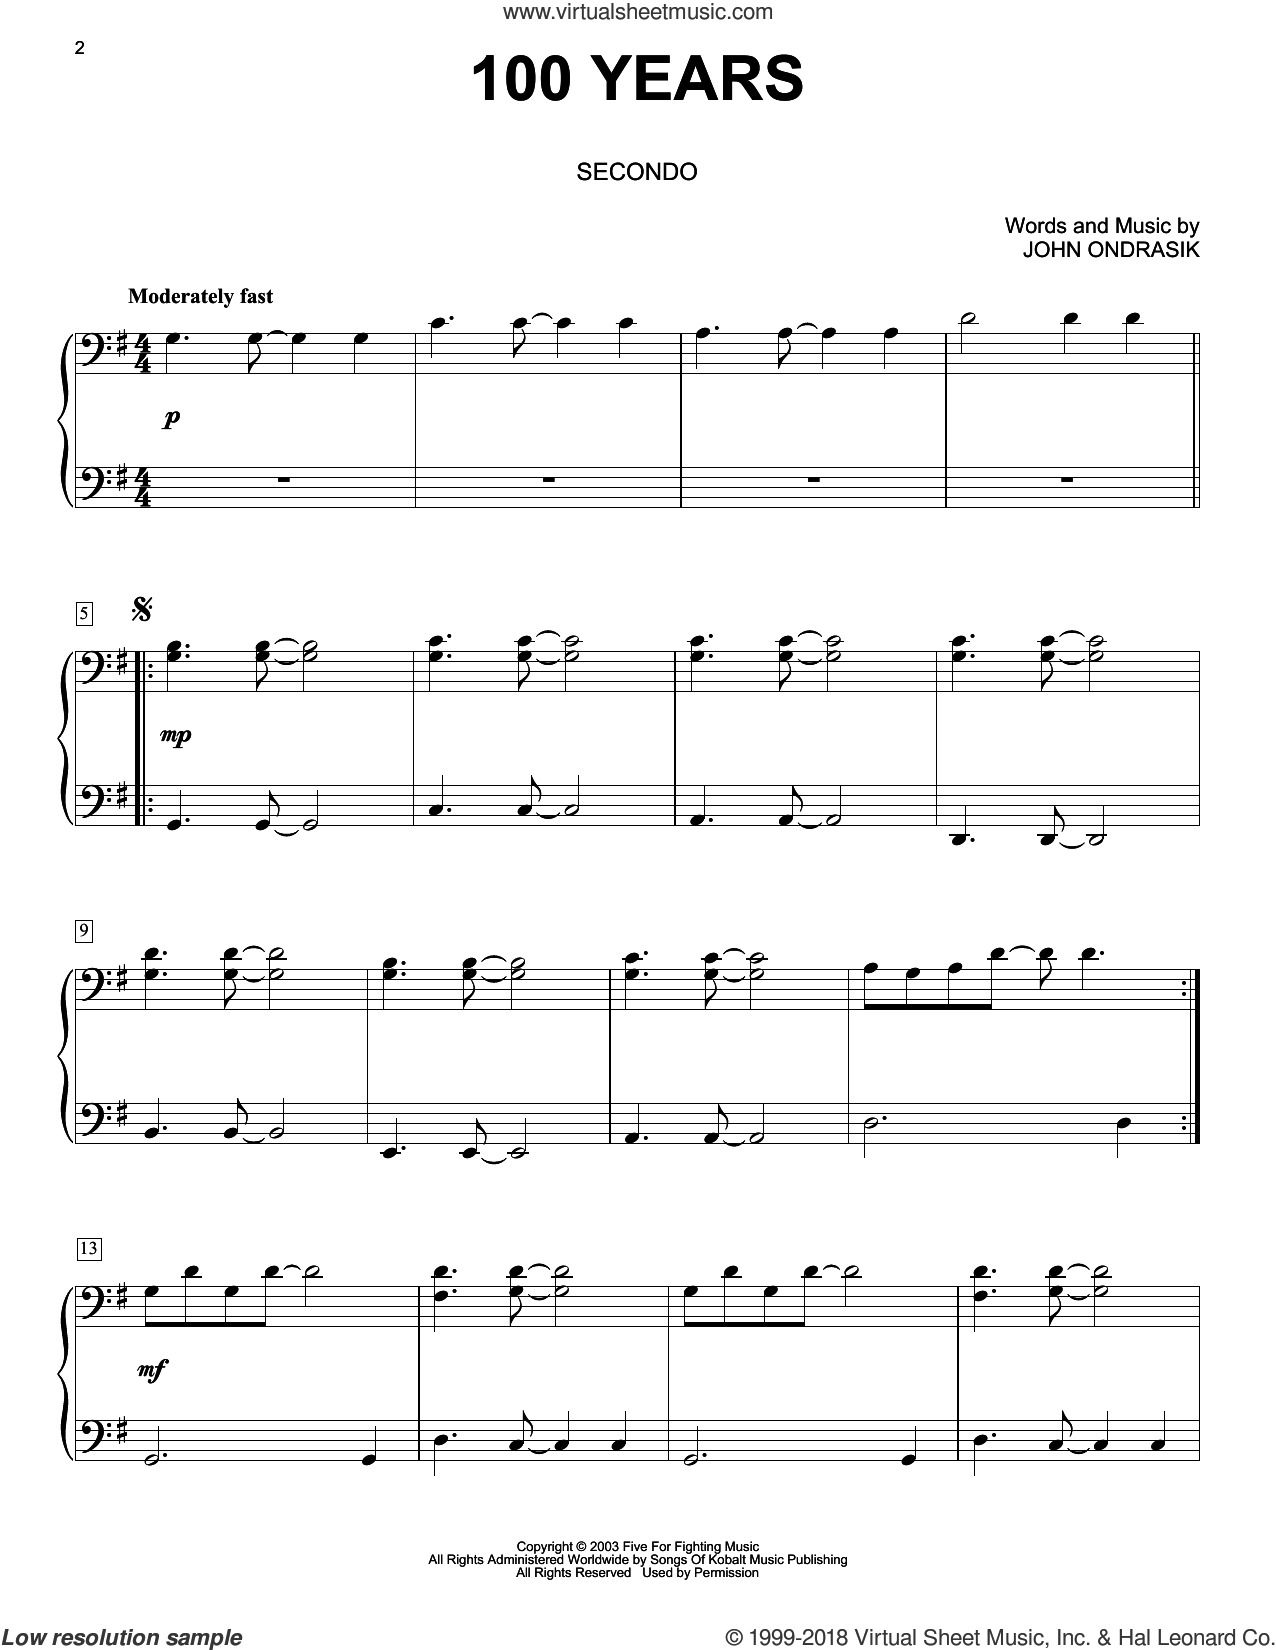 100 Years sheet music for piano four hands (PDF)